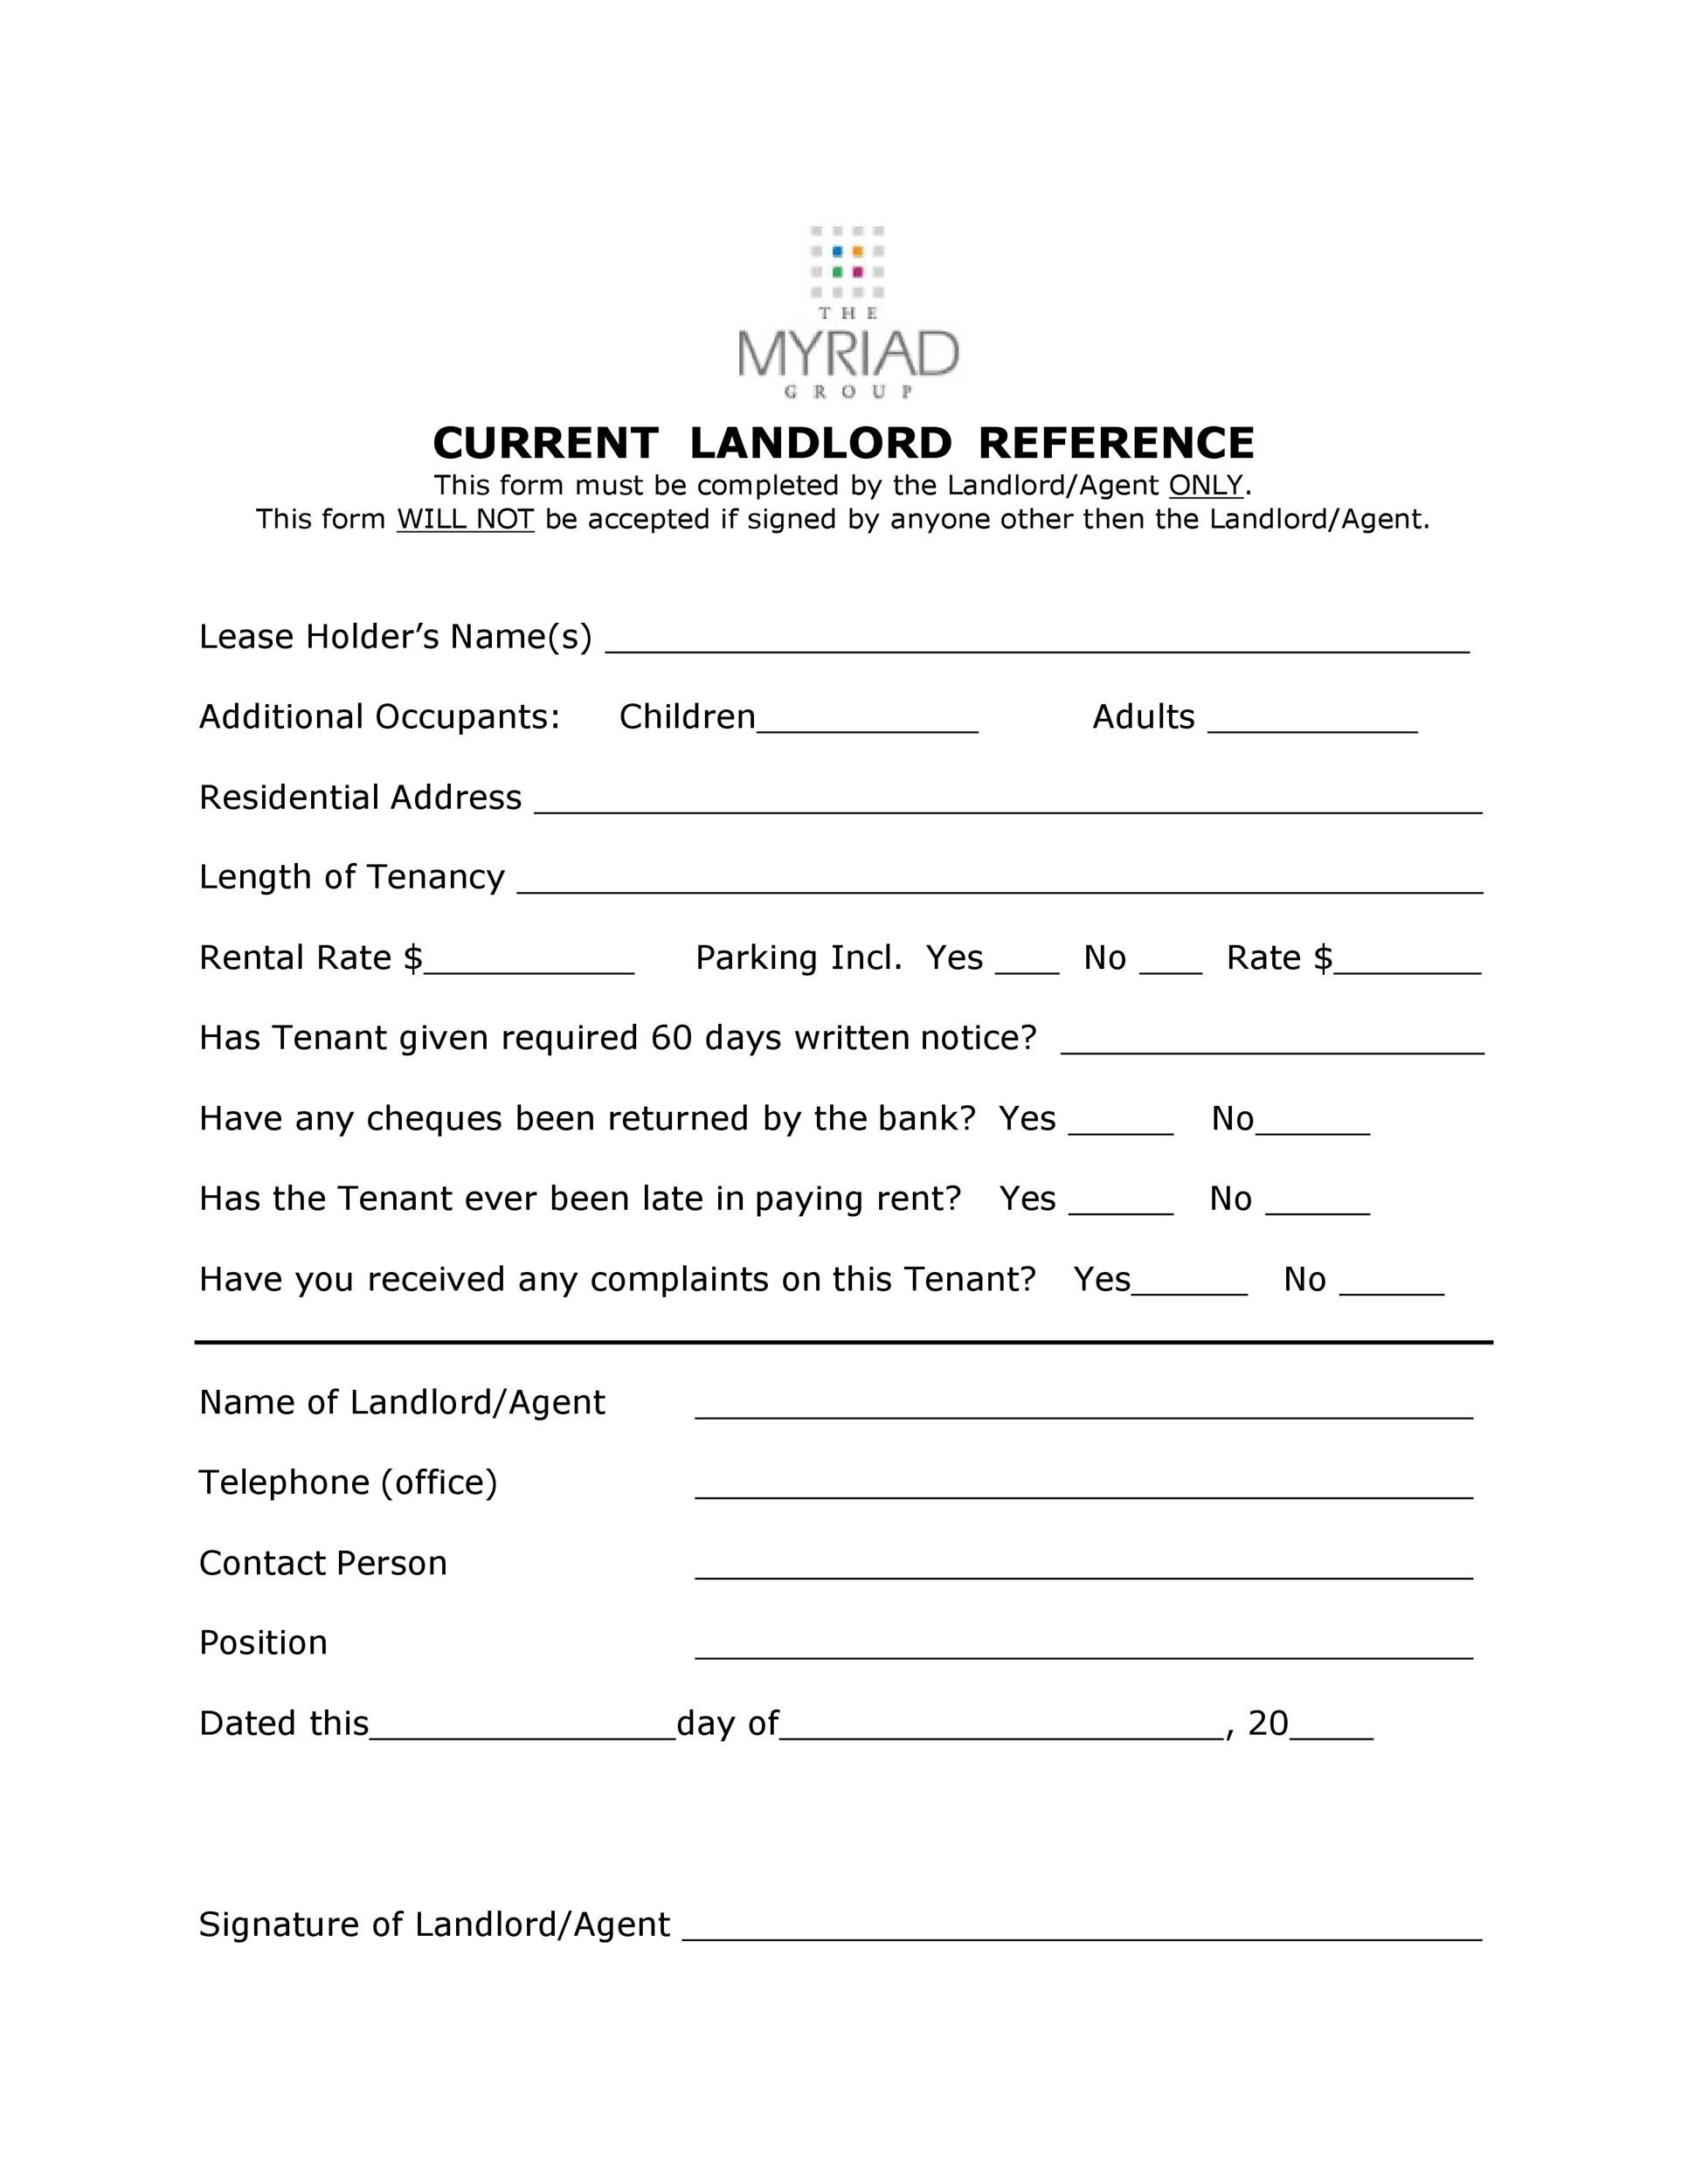 Free landlord reference letter 12